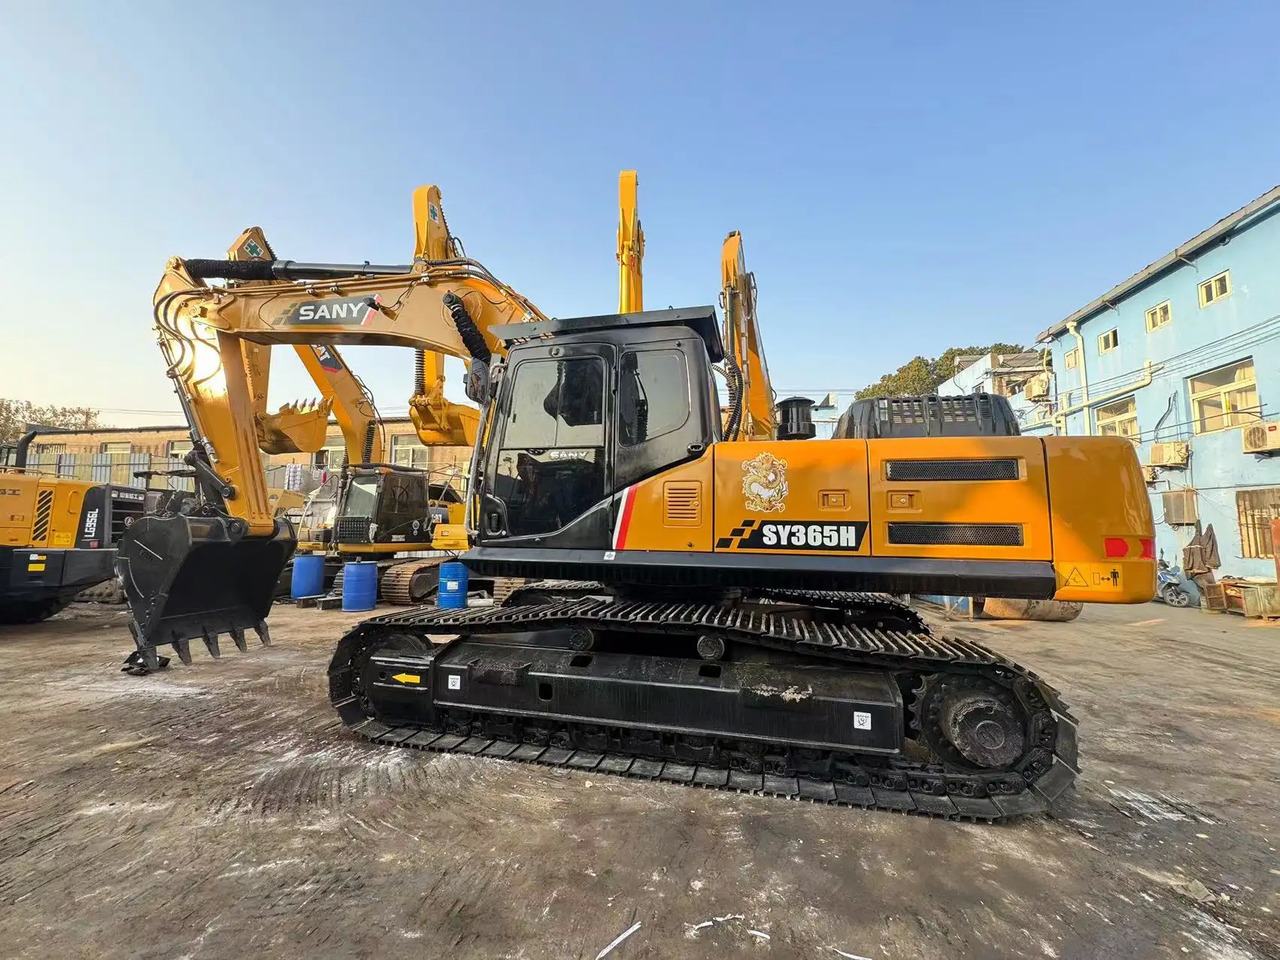 Bæltegravemaskine Hot sale Used 36 ton Excavator Machinery China Brand Sany 365H  with powerful digger construction machinery: billede 3